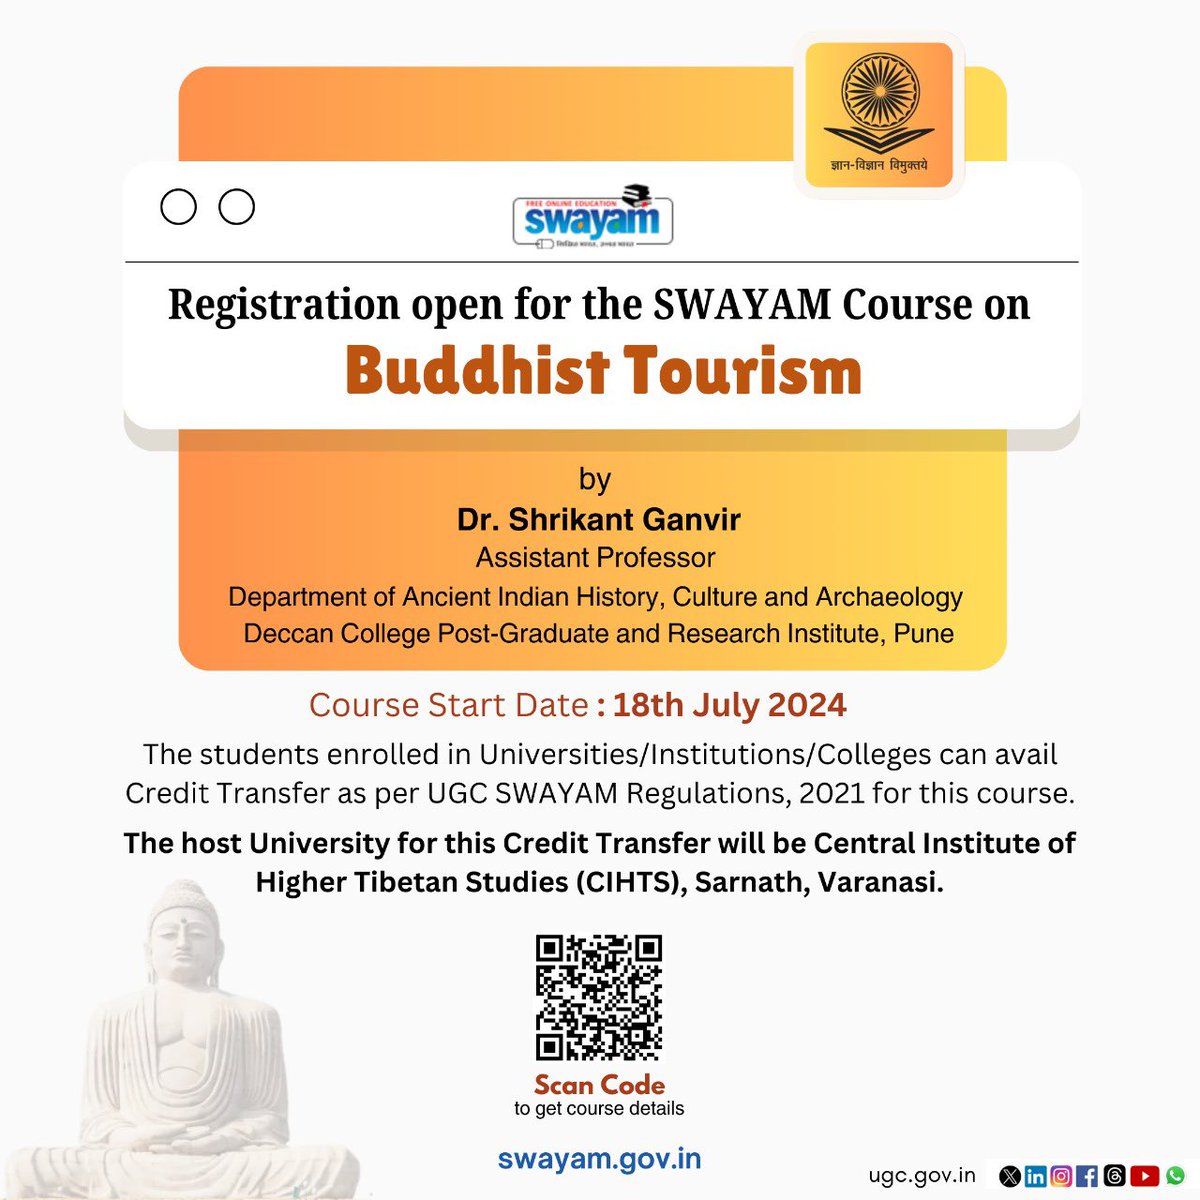 Registration open for the SWAYAM Course Buddhist Tourism by Dr. Shrikant Ganvir, Assistant Professor, Department of Ancient Indian History, Culture and Archaeology, Deccan College Post-Graduate and Research Institute, Pune For more details visit here: onlinecourses.swayam2.ac.in/ugc24_ge09/pre…